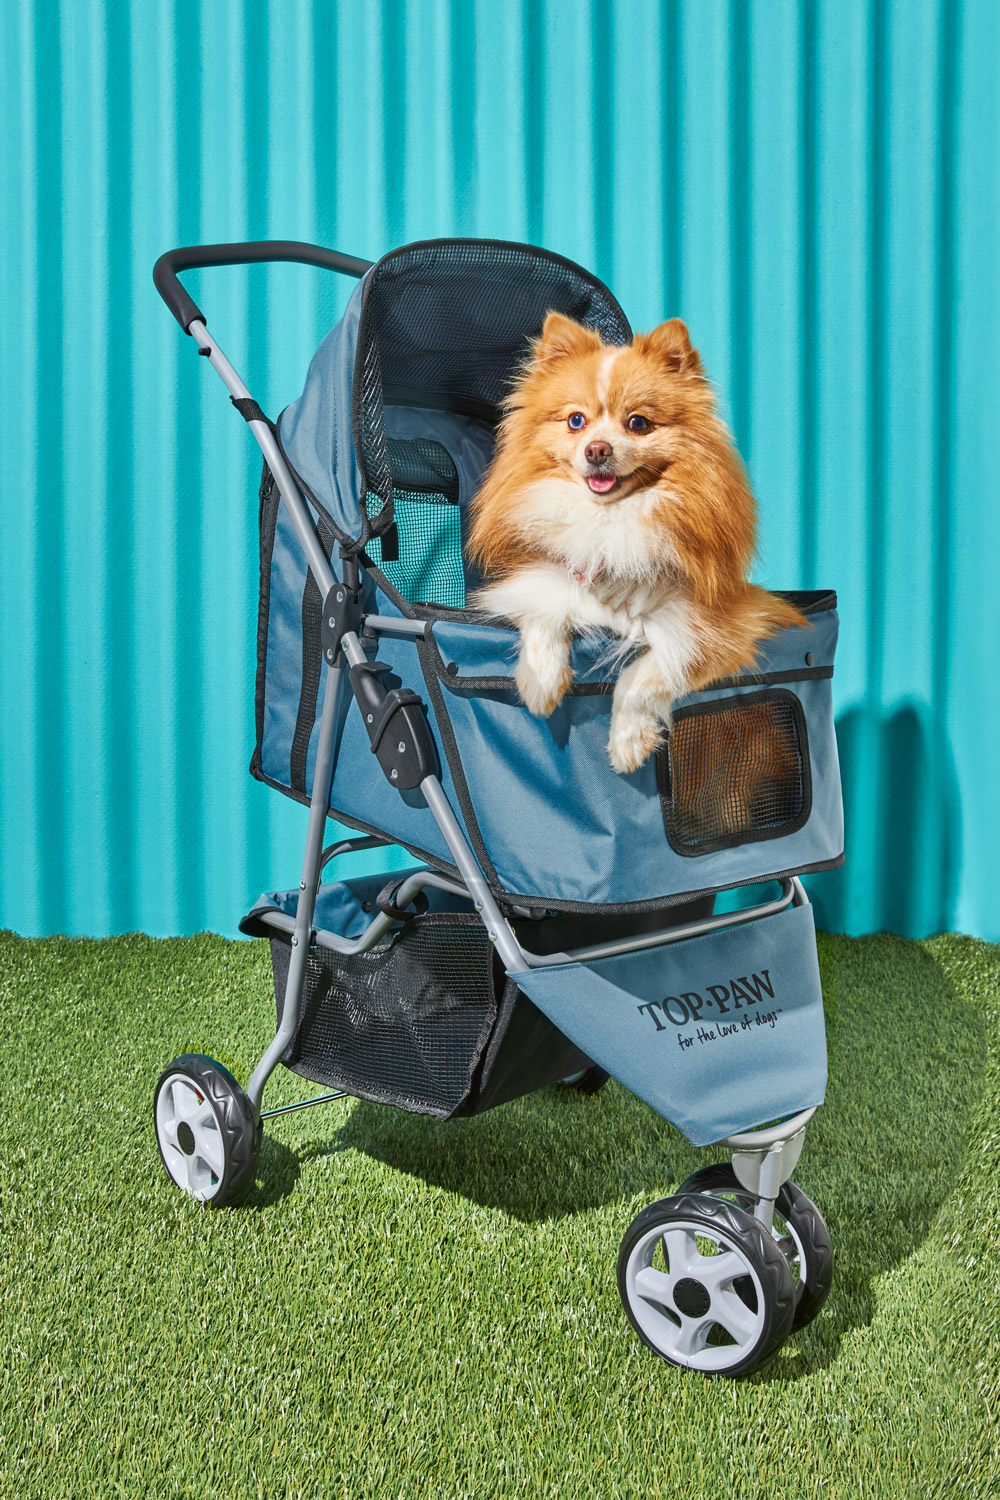 A picture of a dog in a stroller